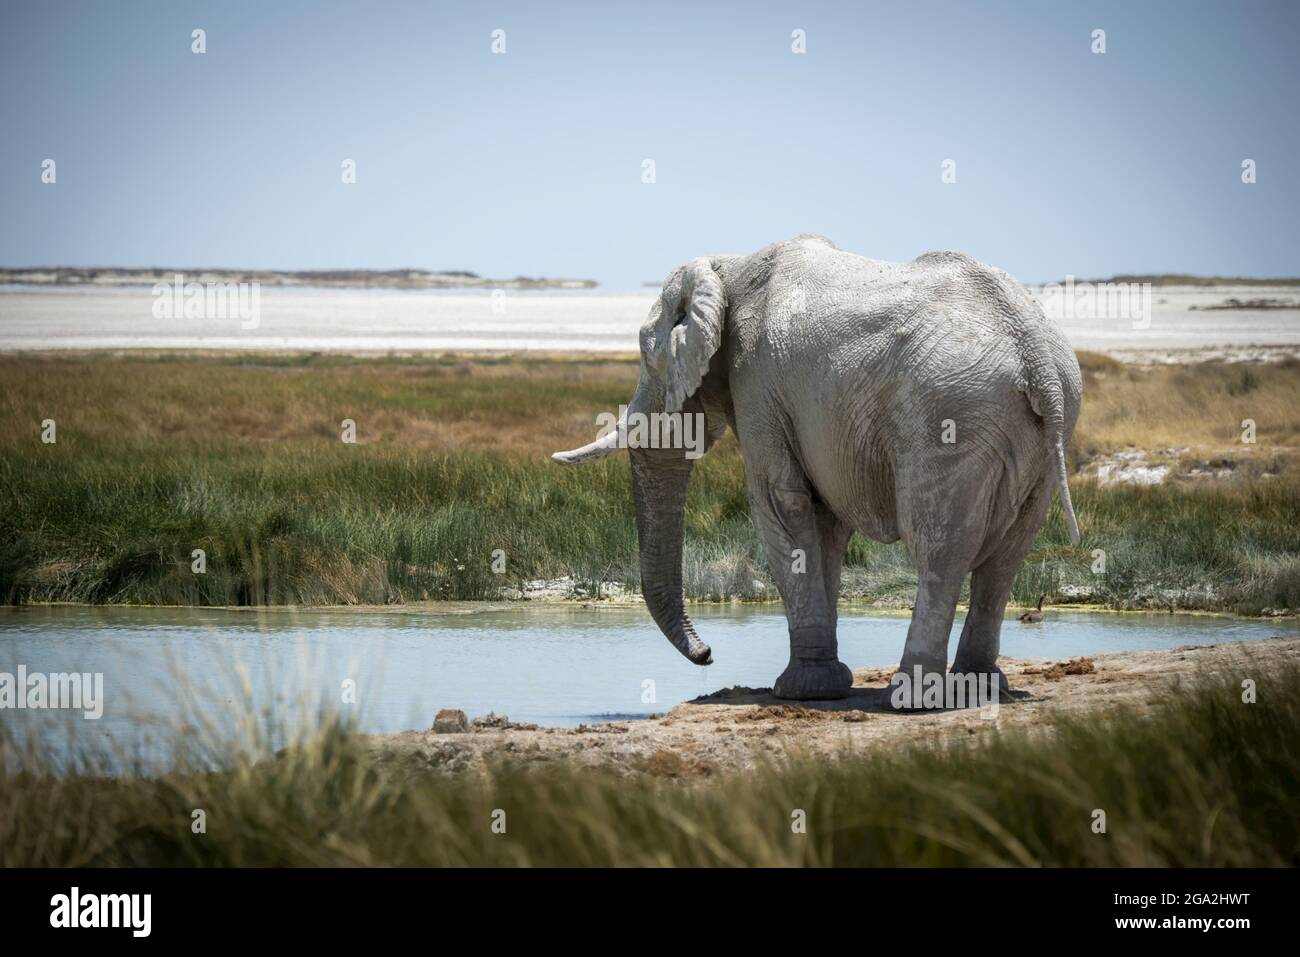 View taken from behind of an African bush elephant (Loxodonta africana) eyeing grassy waterhole and getting ready to drink on the savanna in Etosha... Stock Photo